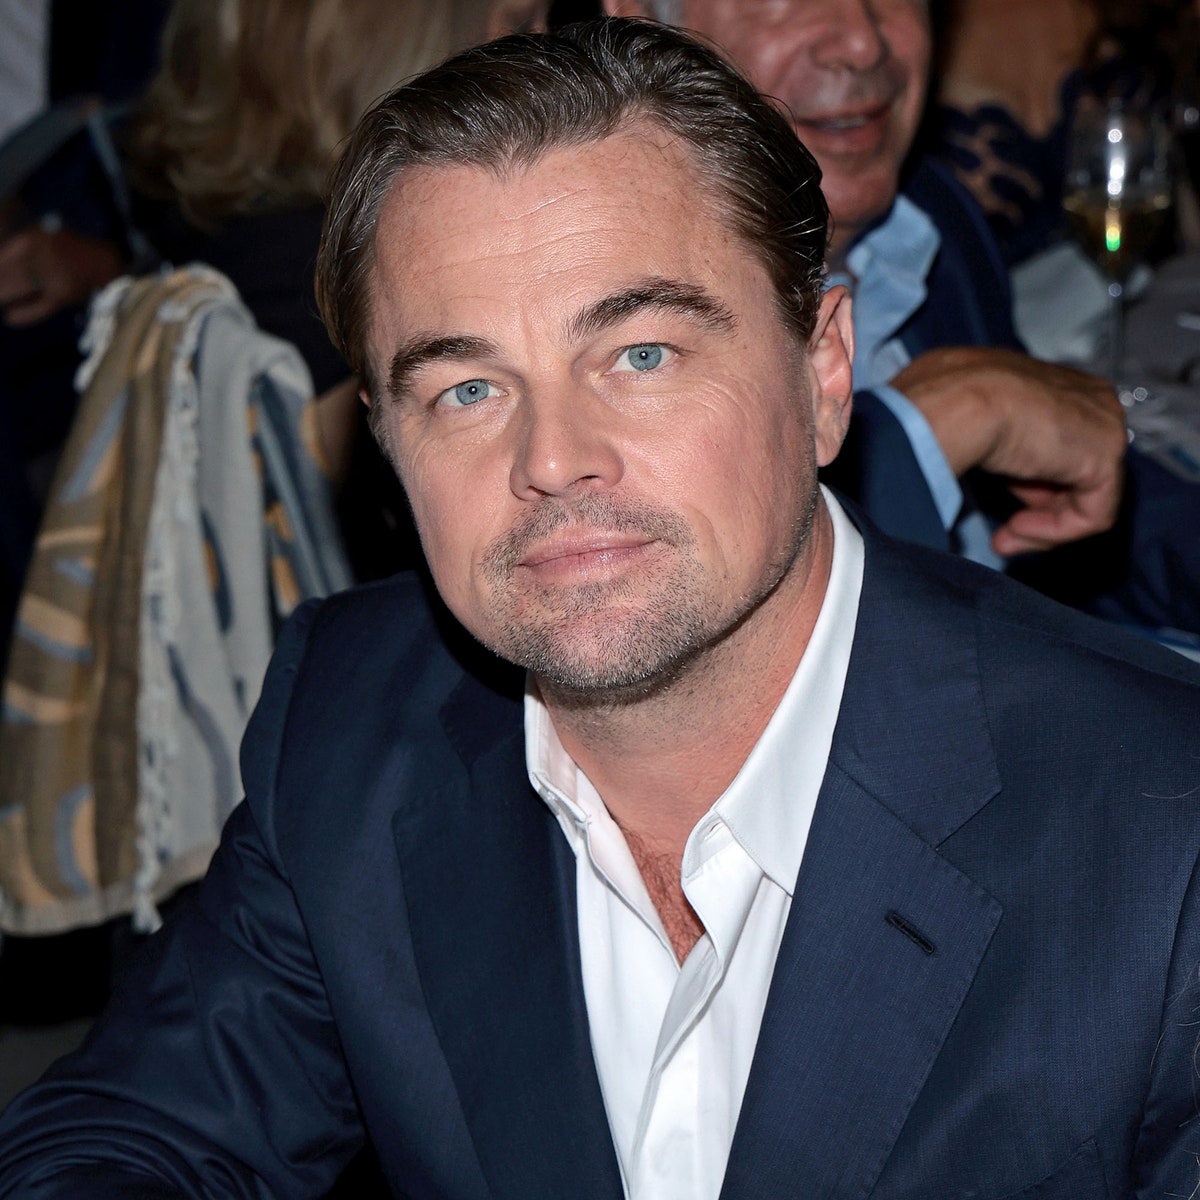 Leonardo DiCaprio invests in circular watch startup, sending signal to the industry